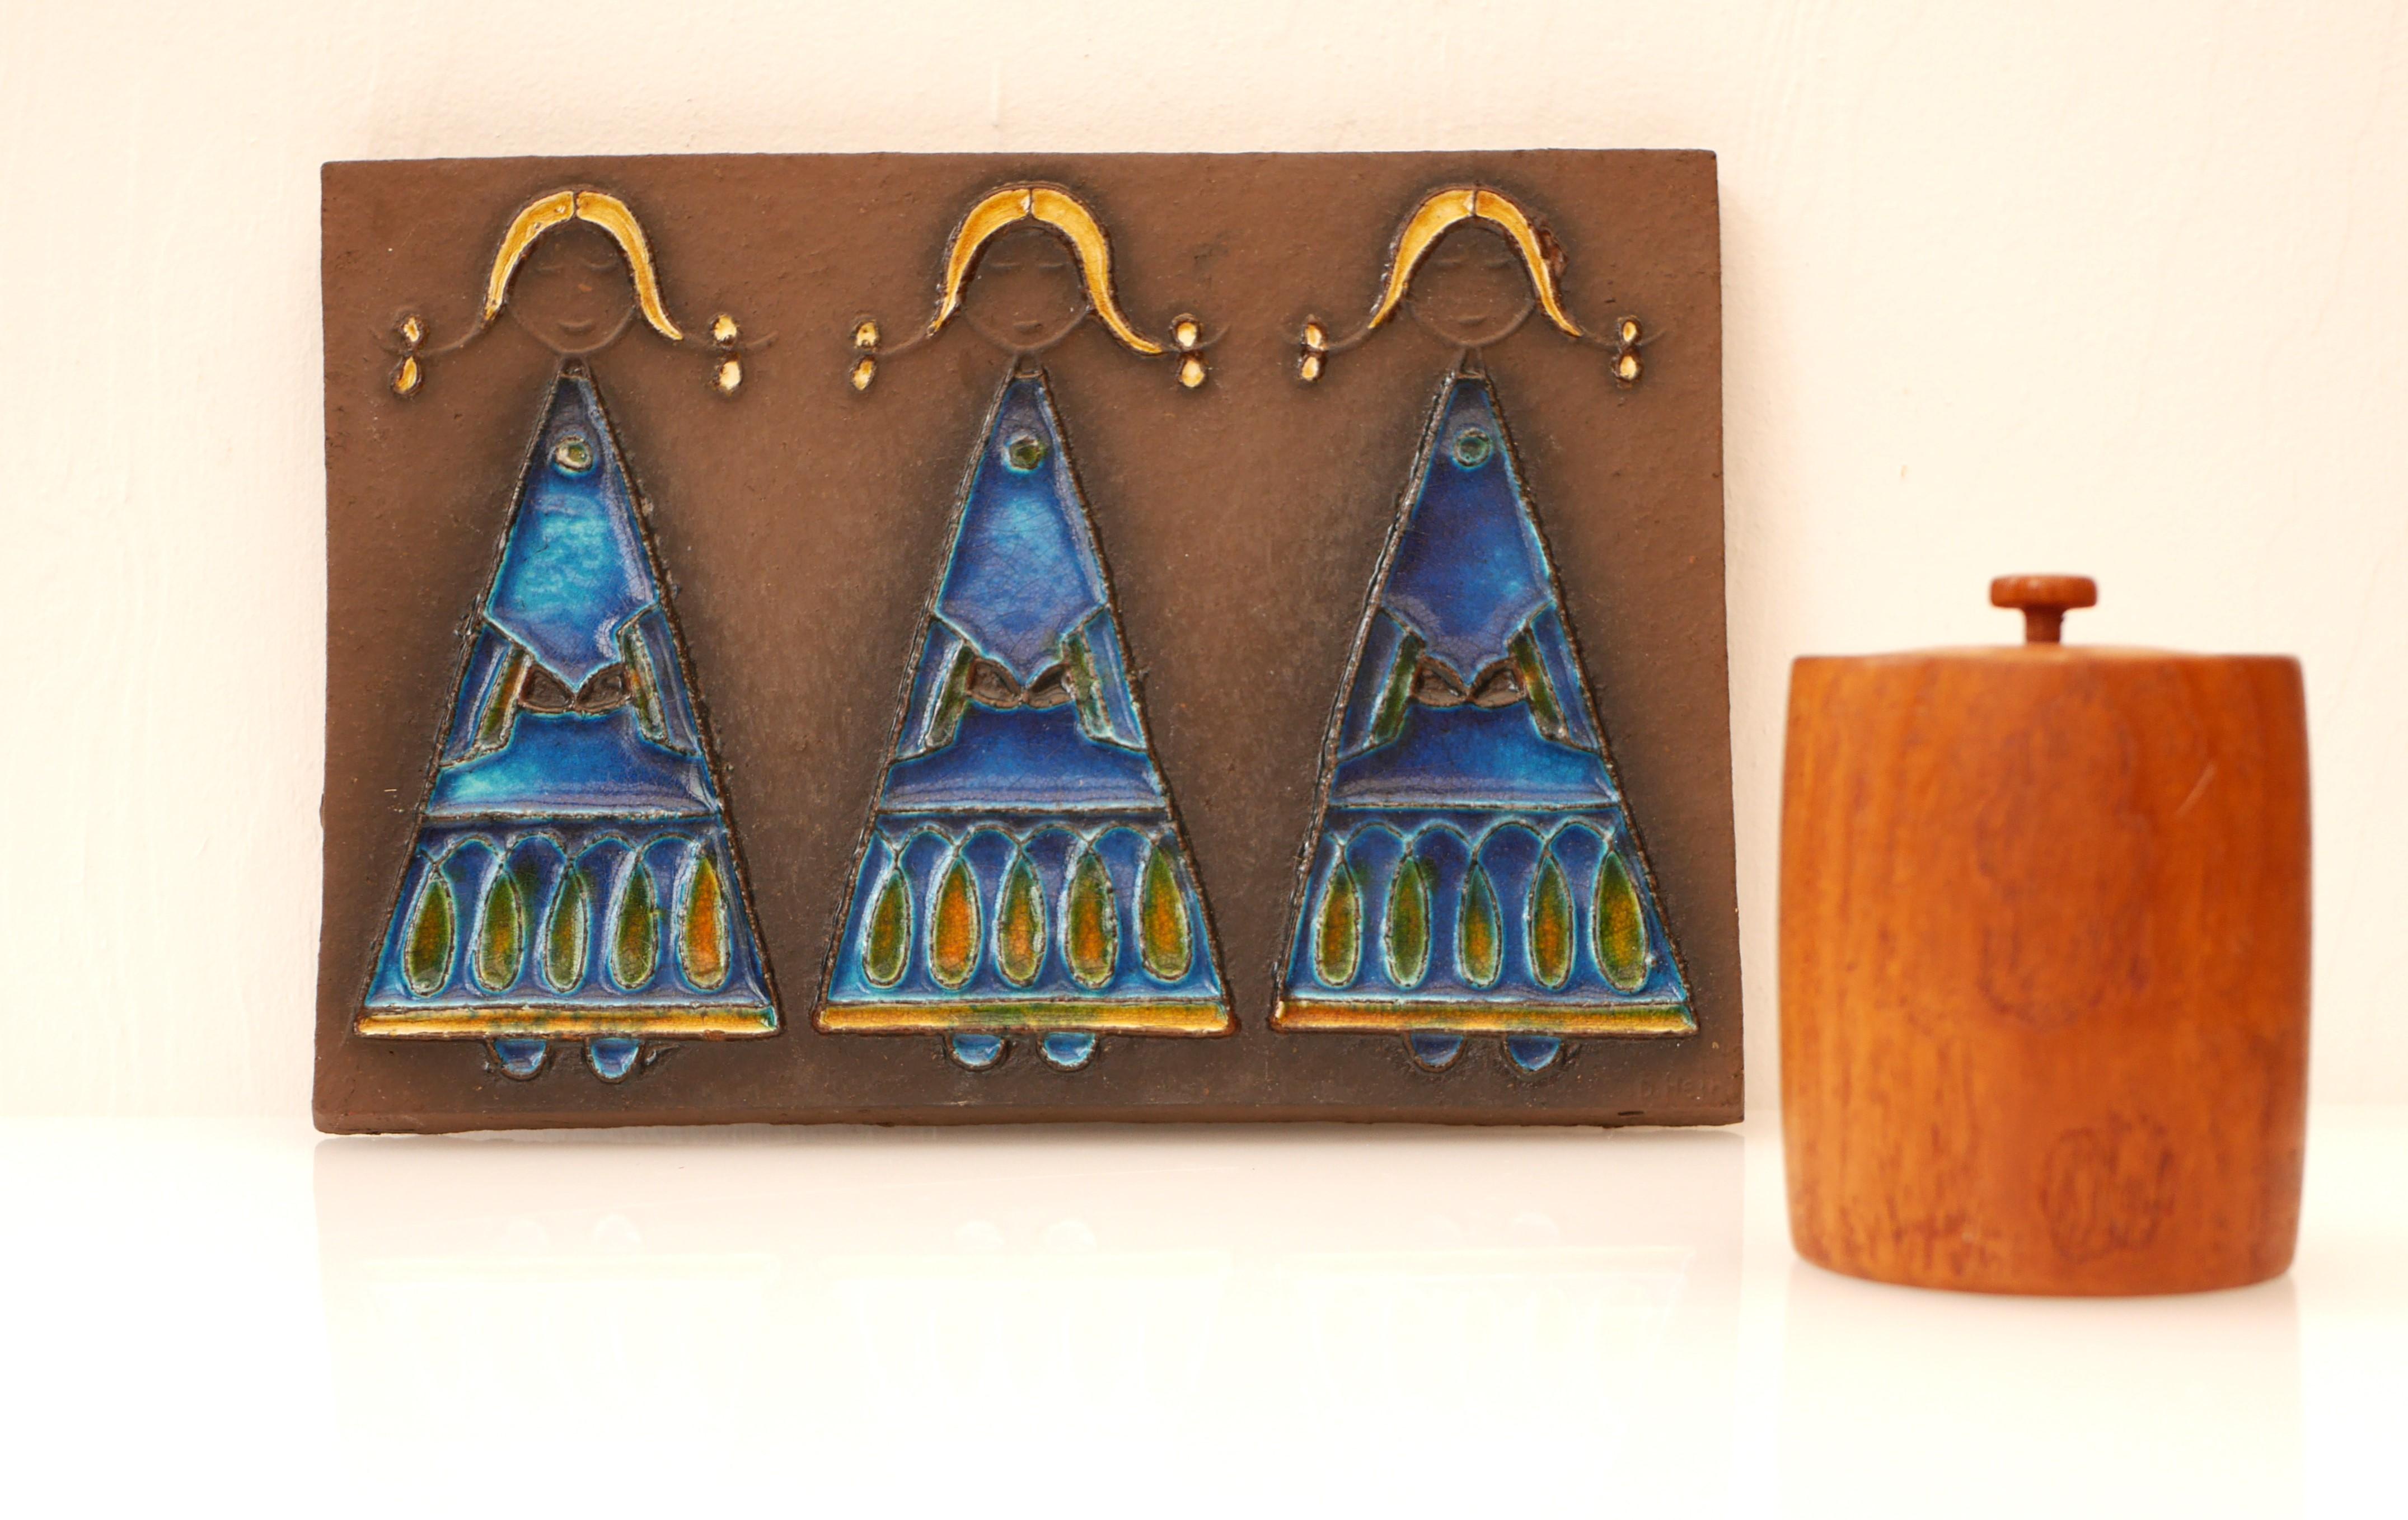 Mid-century modern signed Scandinavian art pottery wall tile decoration, a fantastic wall plaque made and signed by Dietlinde Hein Knabstrup, Denmark. This piece is known as “the Three sister” and has a very 60's feeling to it and it depicts three